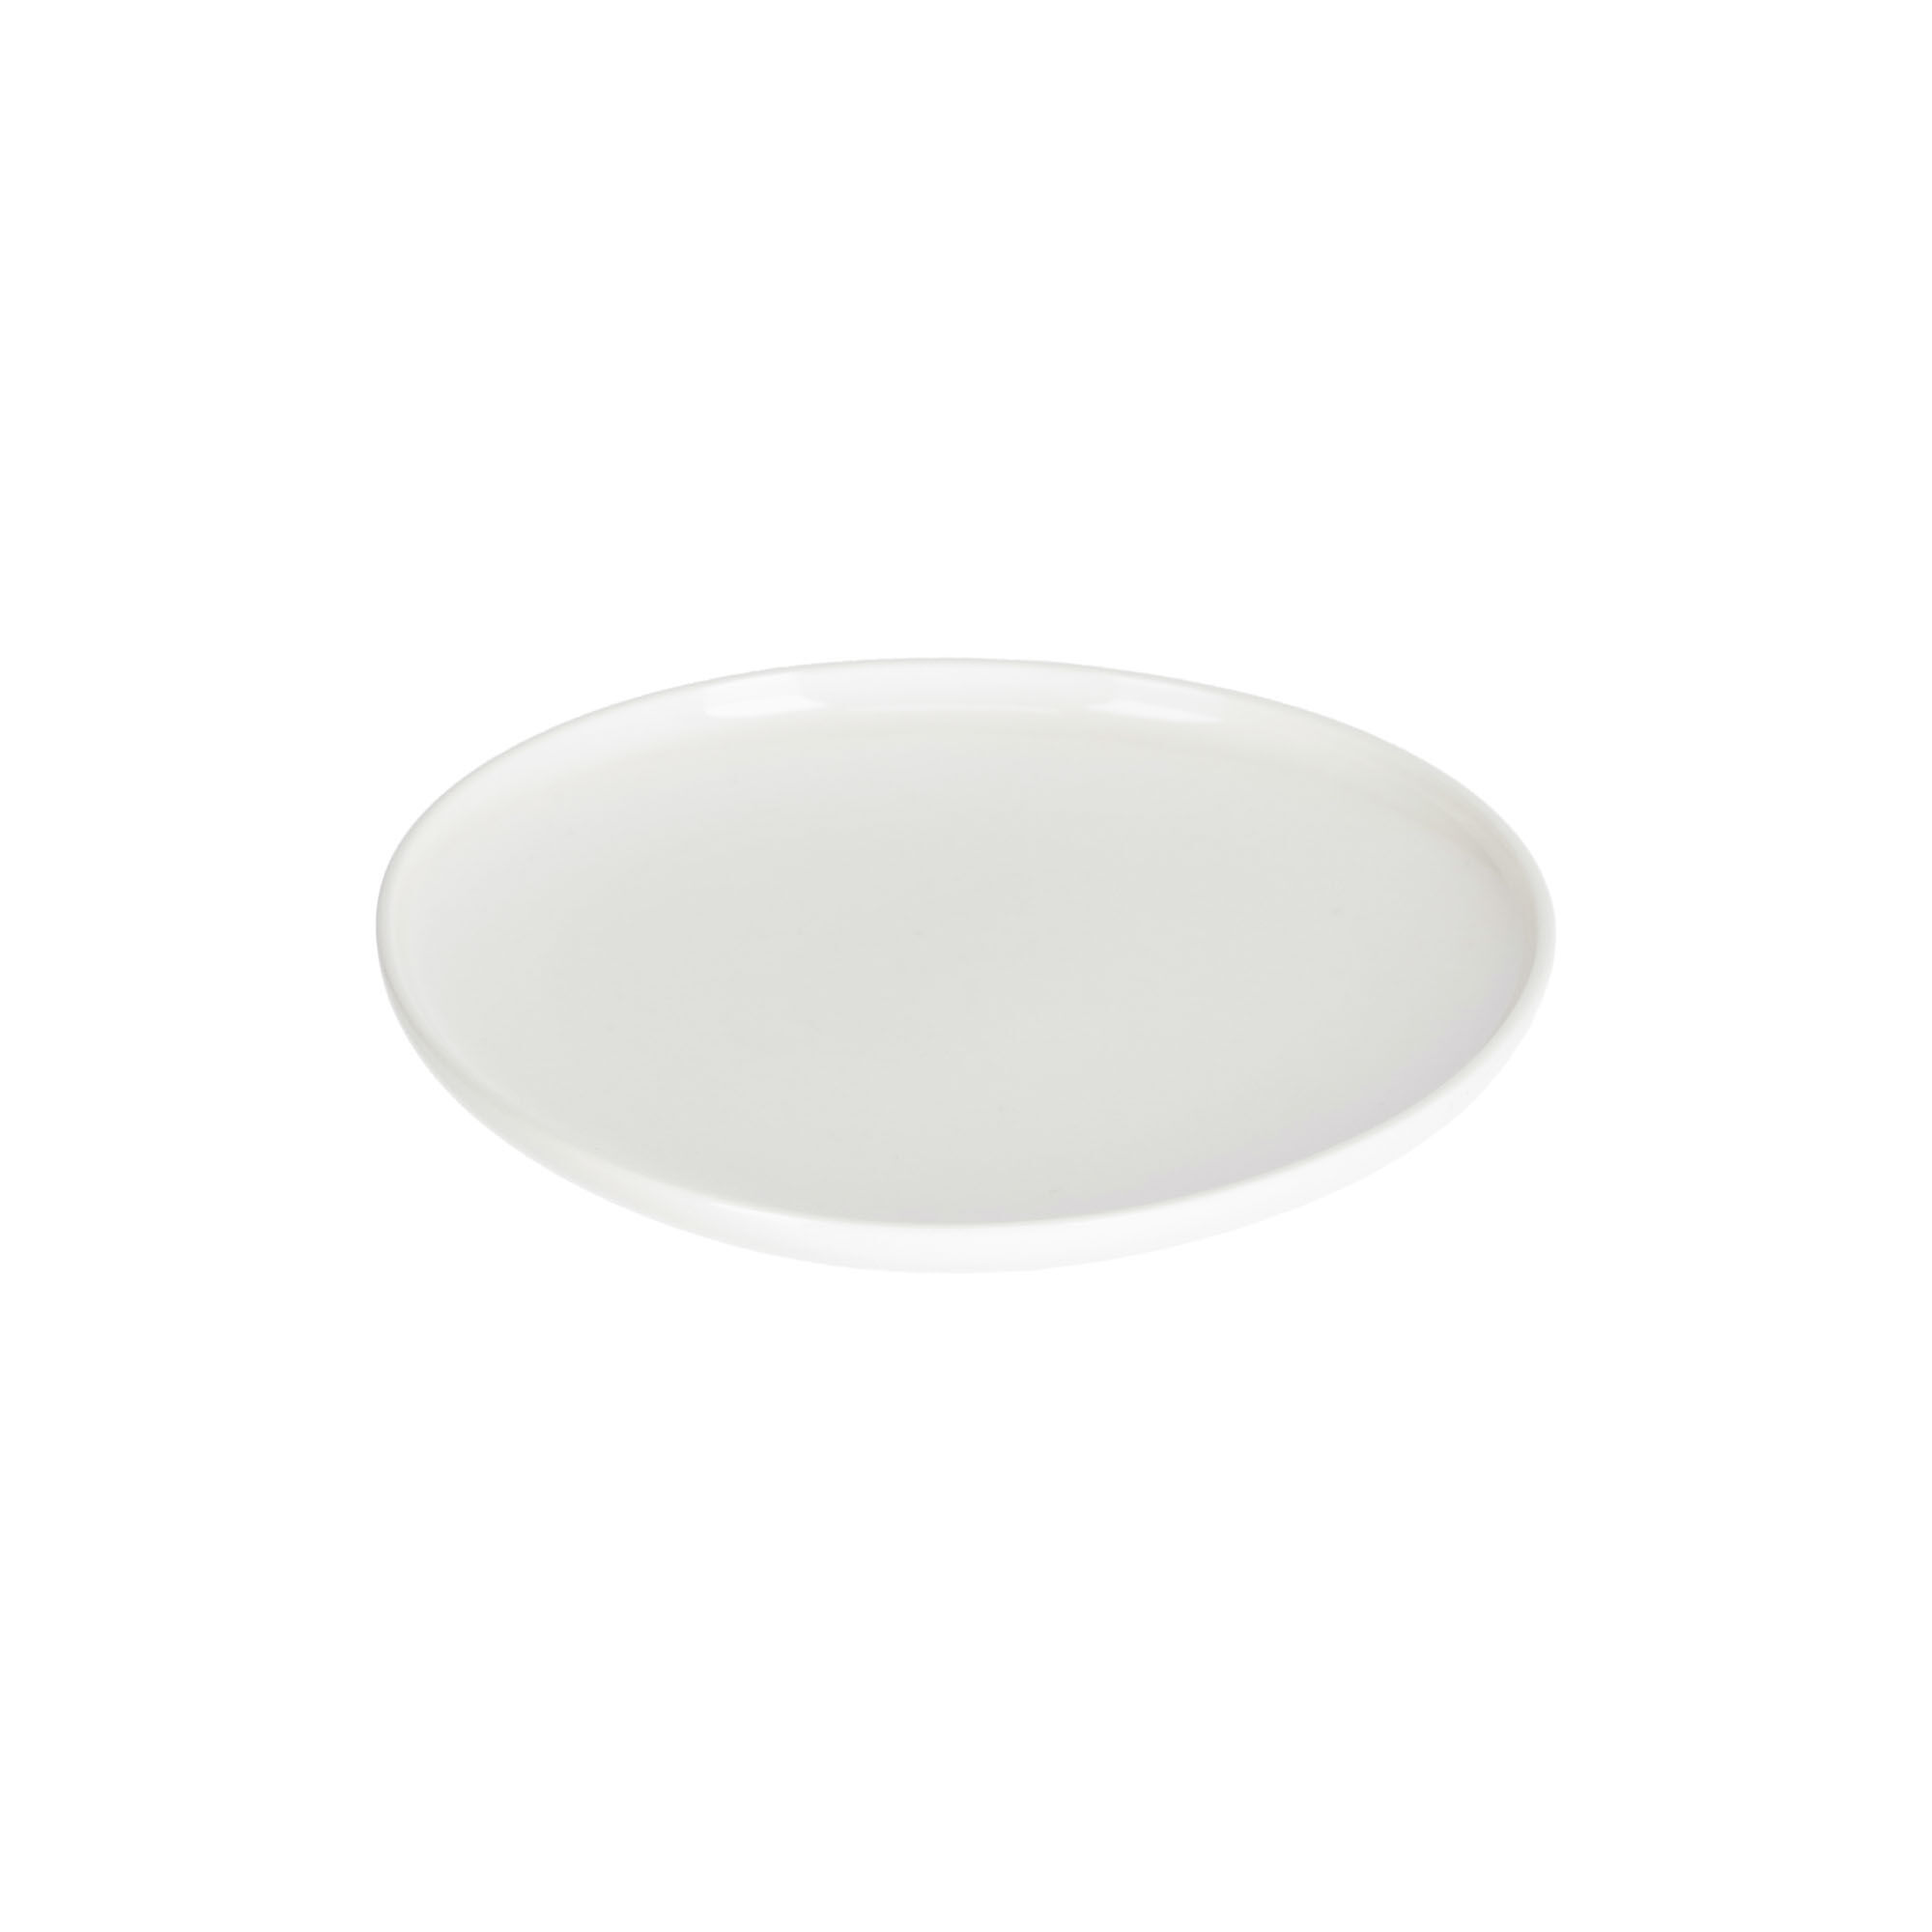 Kave Home Pahi round porcelain dessert plate in white